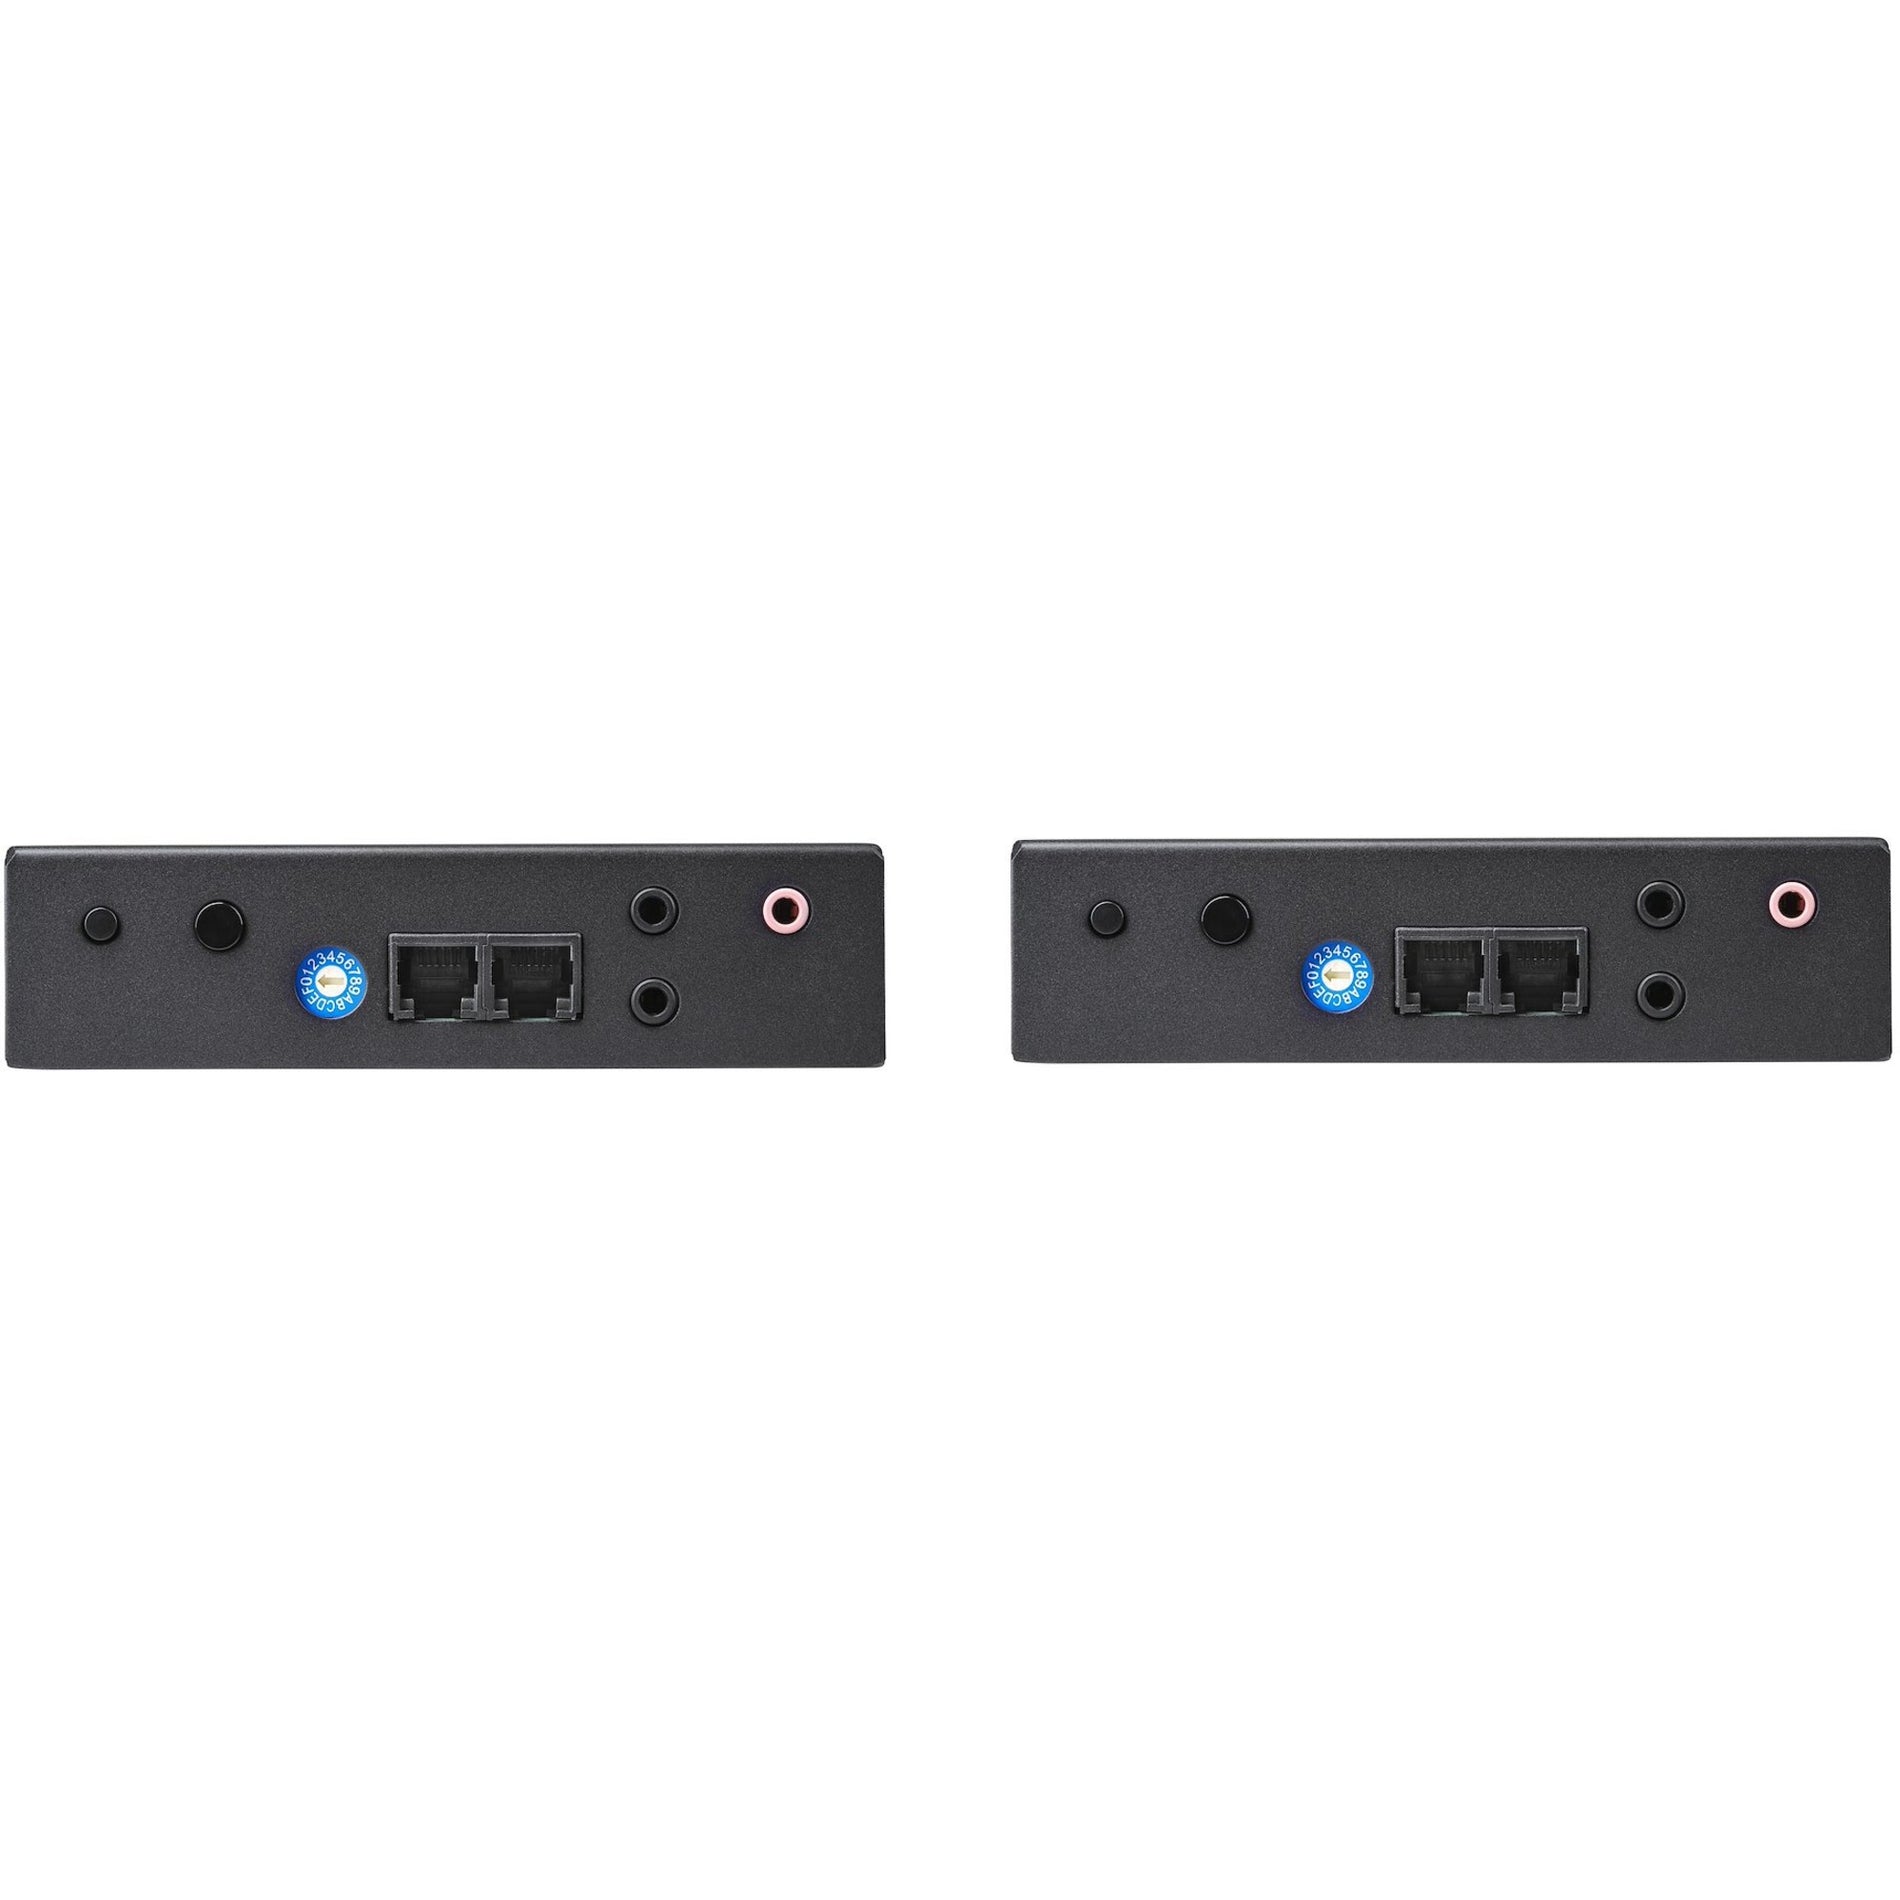 StarTech.com ST12MHDLAN4K HDMI Over IP Extender Kit - 4K, Video Over IP Extender with Support for Video Wall